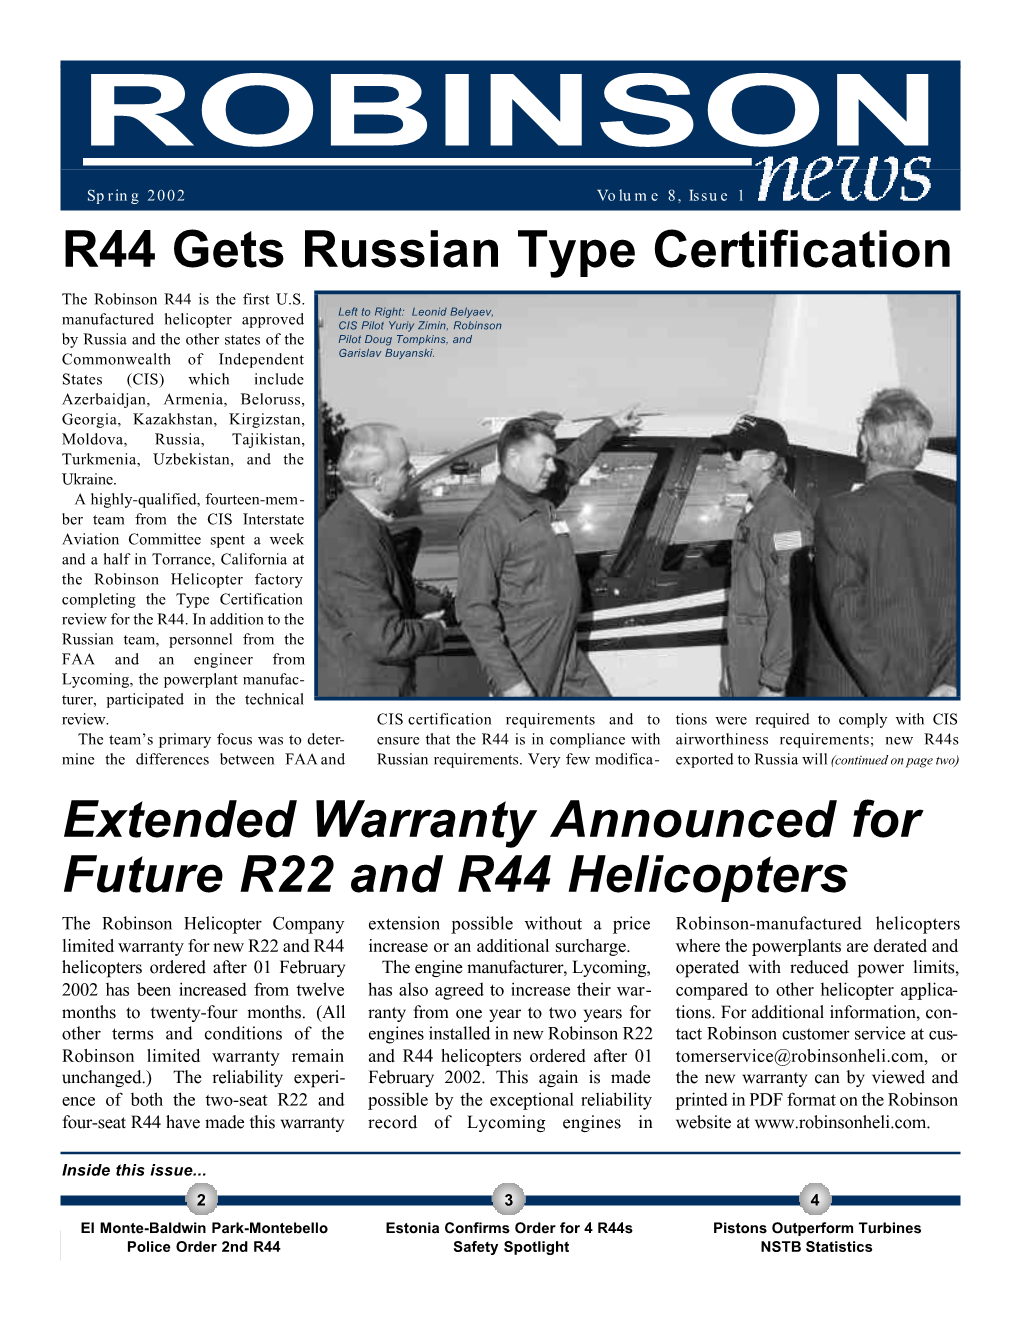 R44 Gets Russian Type Certification the Robinson R44 Is the First U.S